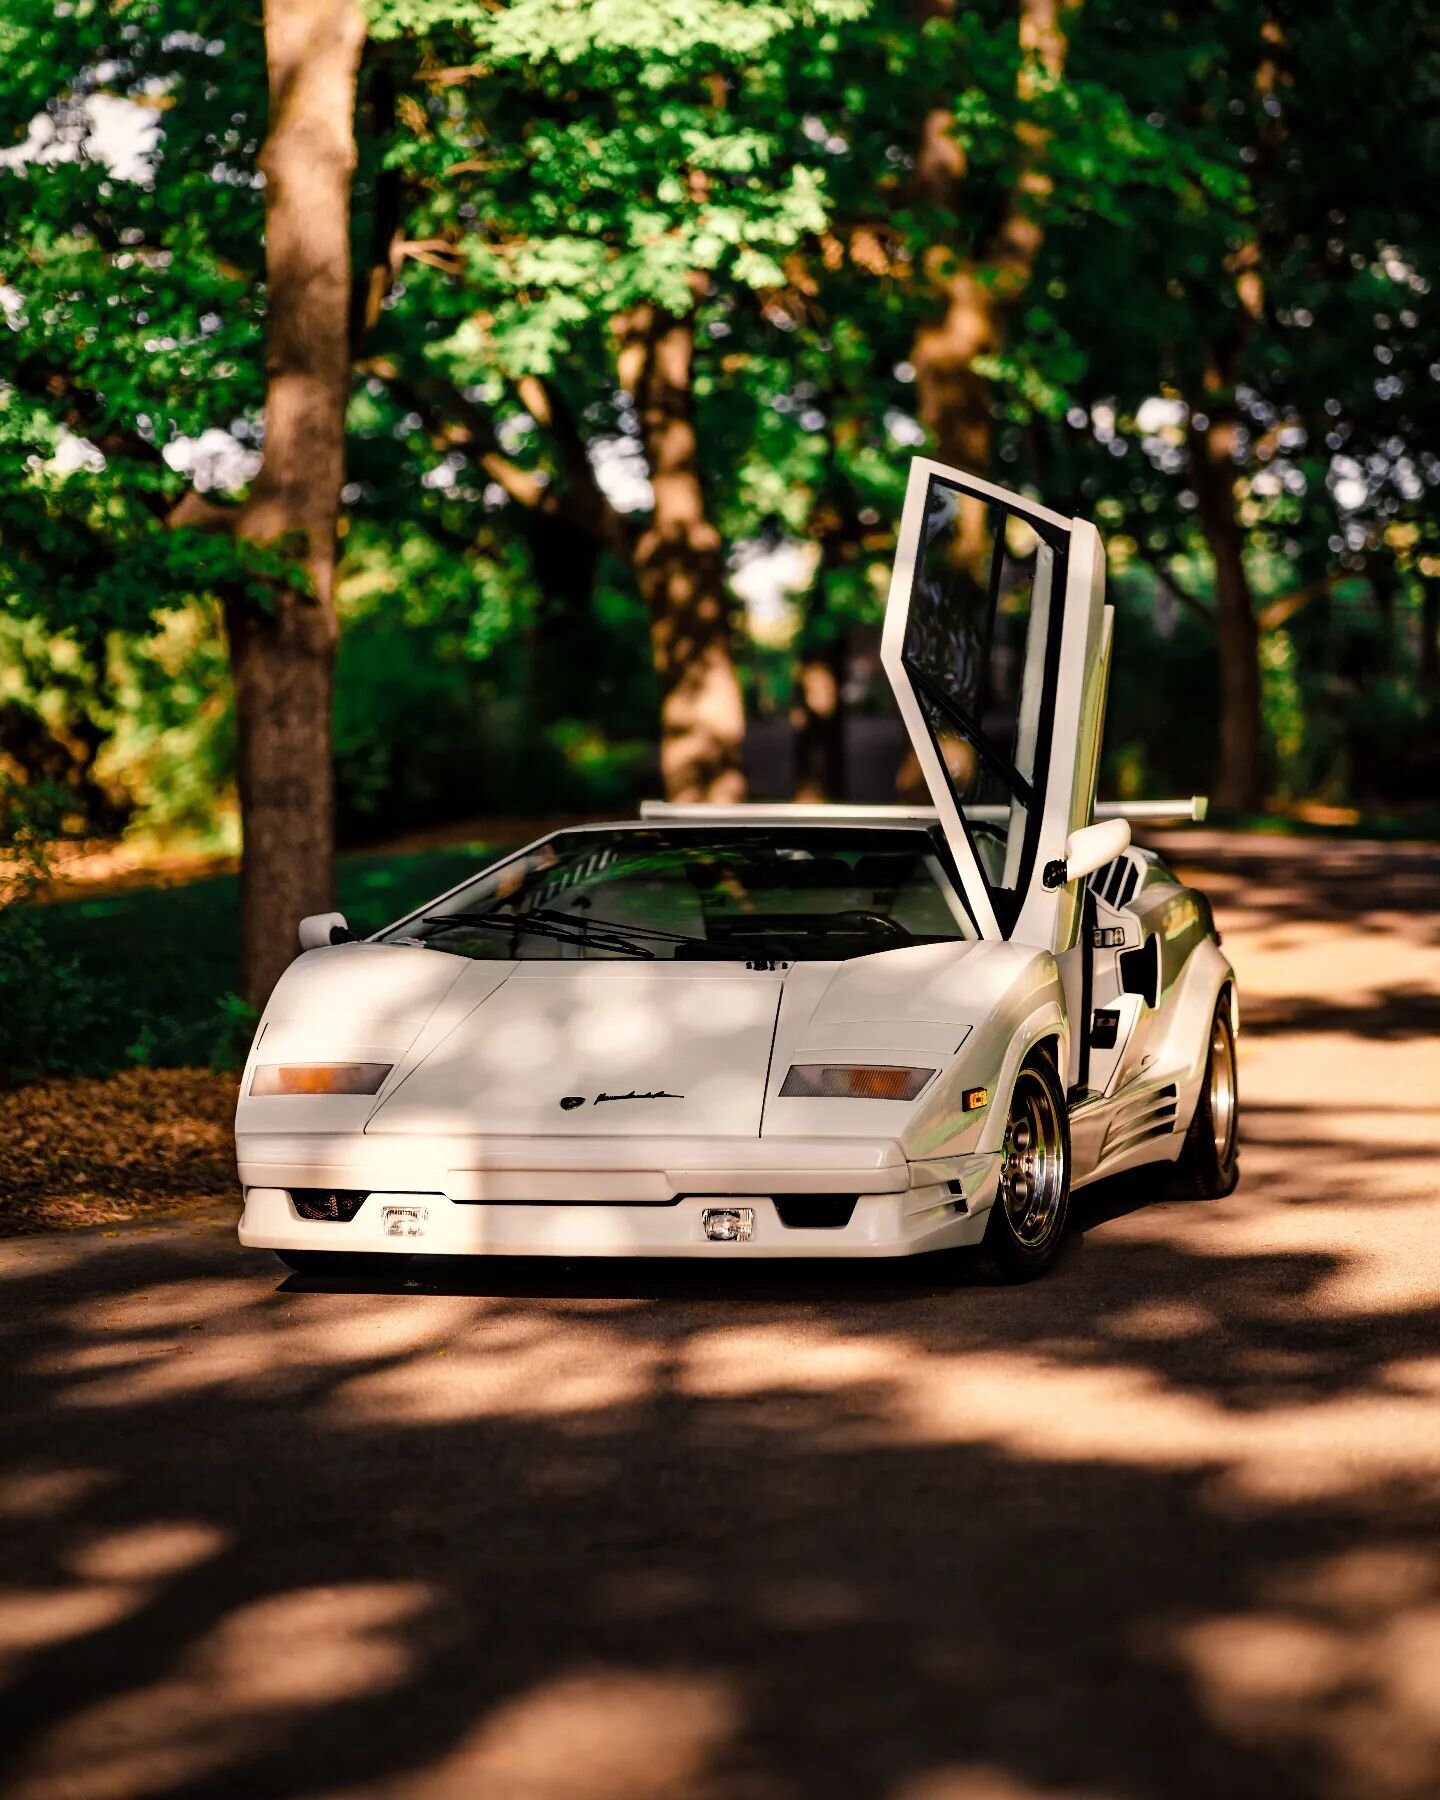 The legendary 🐺 of Wall Street.

Like this post if you think @ryfips needs to come visit in Calgary.

#countach #lamborghinicountach #retrolamborghini #Calgary #yyc